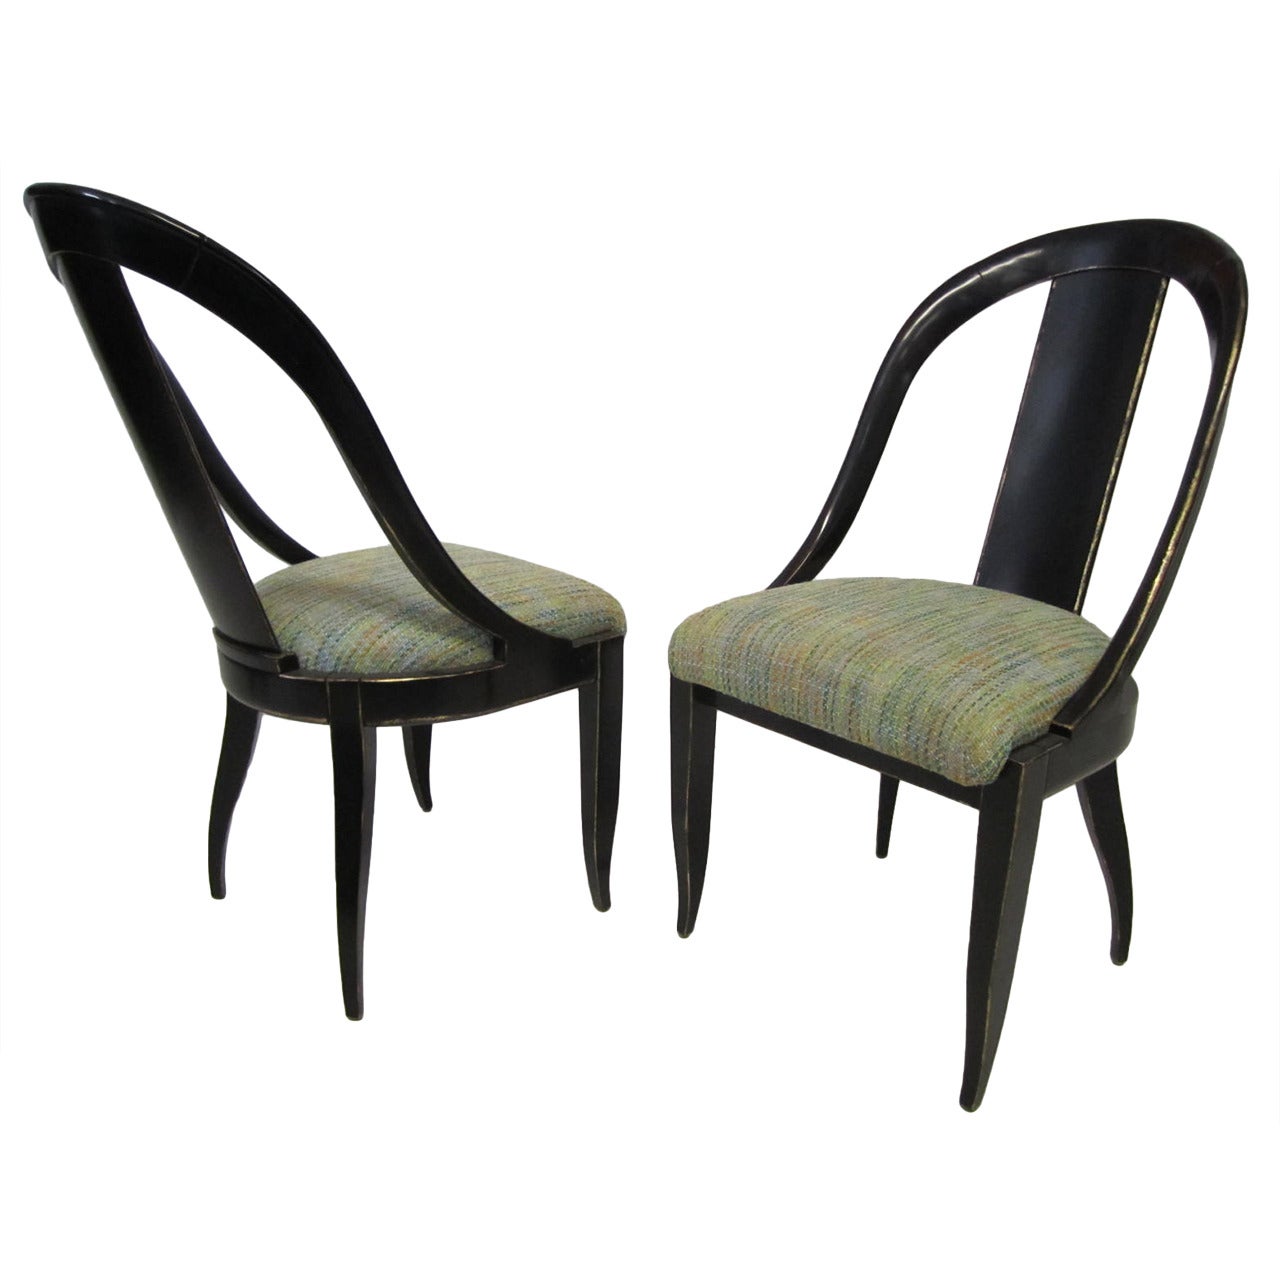 Sensuous Pair of Swaim Spoon Back Lacquered Side Chairs, Mid-Century Modern